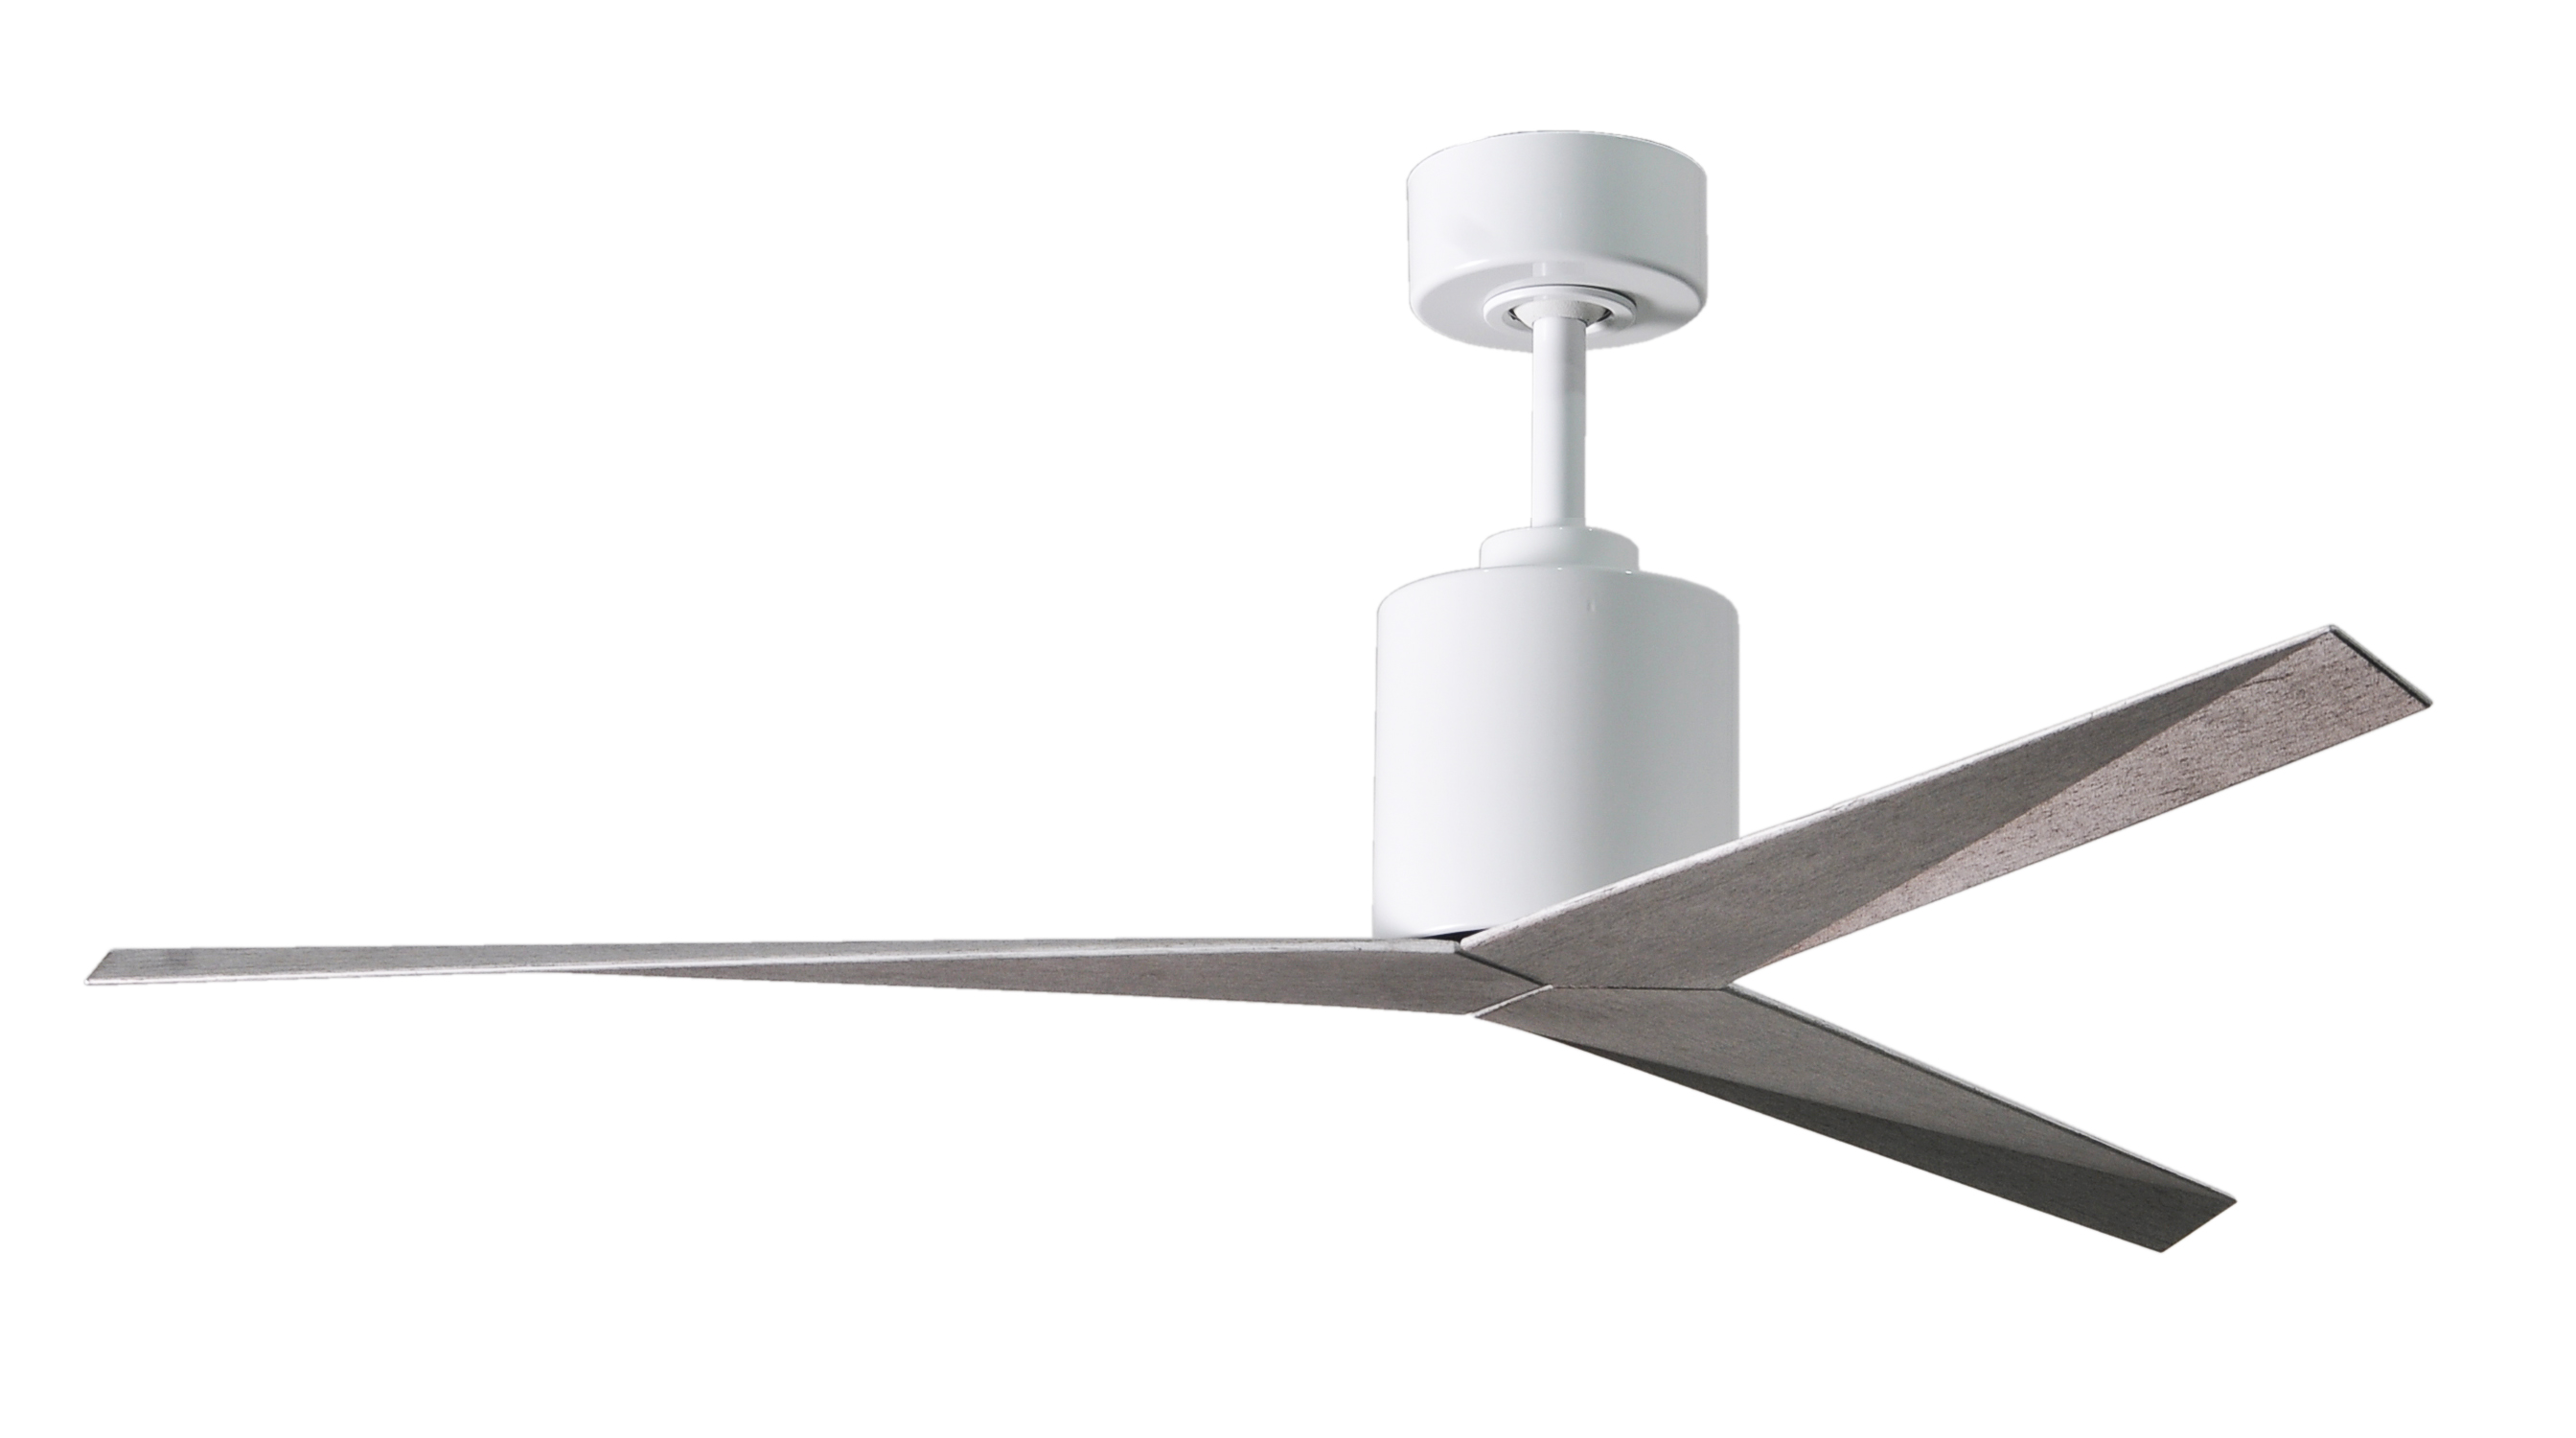 Matthews Fans-EK-WH-BN-Eliza-Ceiling Fan-56 Inches Wide by 12 Inches High   Gloss White Finish with Brushed Nickel Blade Finish